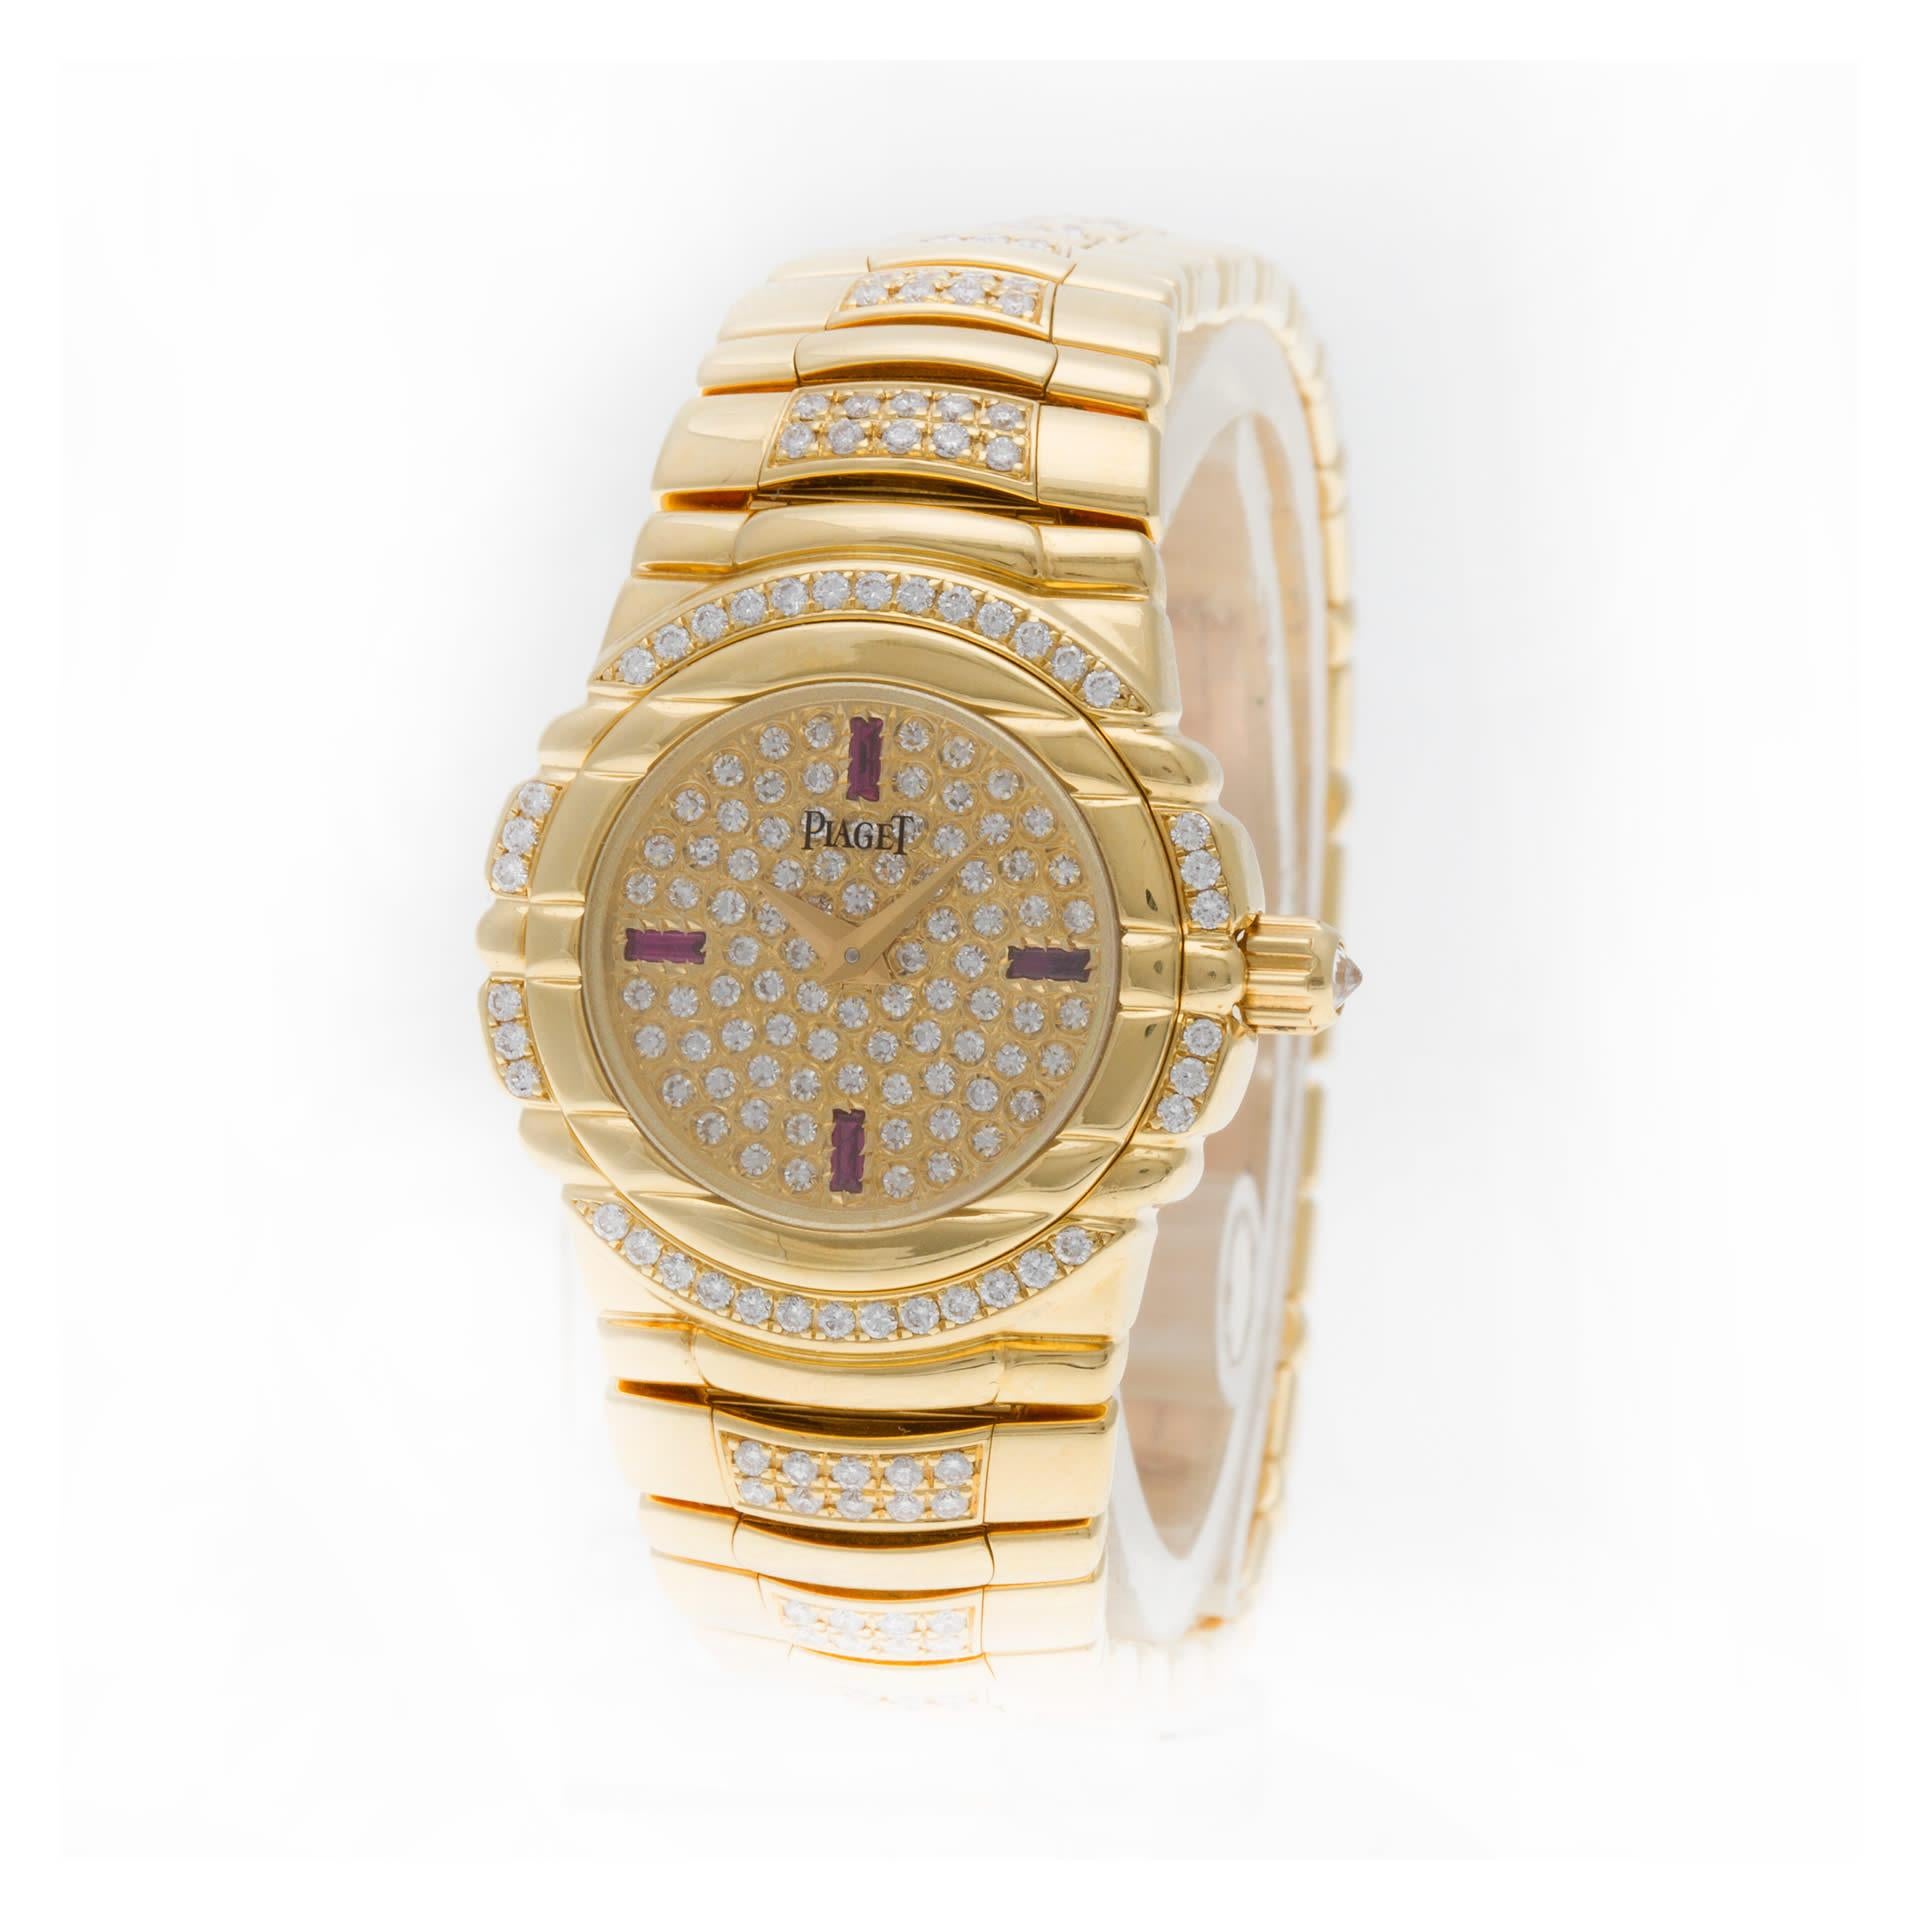 Piaget Tanagra in 18k yellow gold with factory original diamond bezel, pave diamond and ruby dial, and diamond bracelet. Quartz. Ref 16035 M 404 D. 25mm case size. Circa 1990s. Fits 6.25 inches wrist. Fine Pre-owned Piaget Watch.  Certified preowned